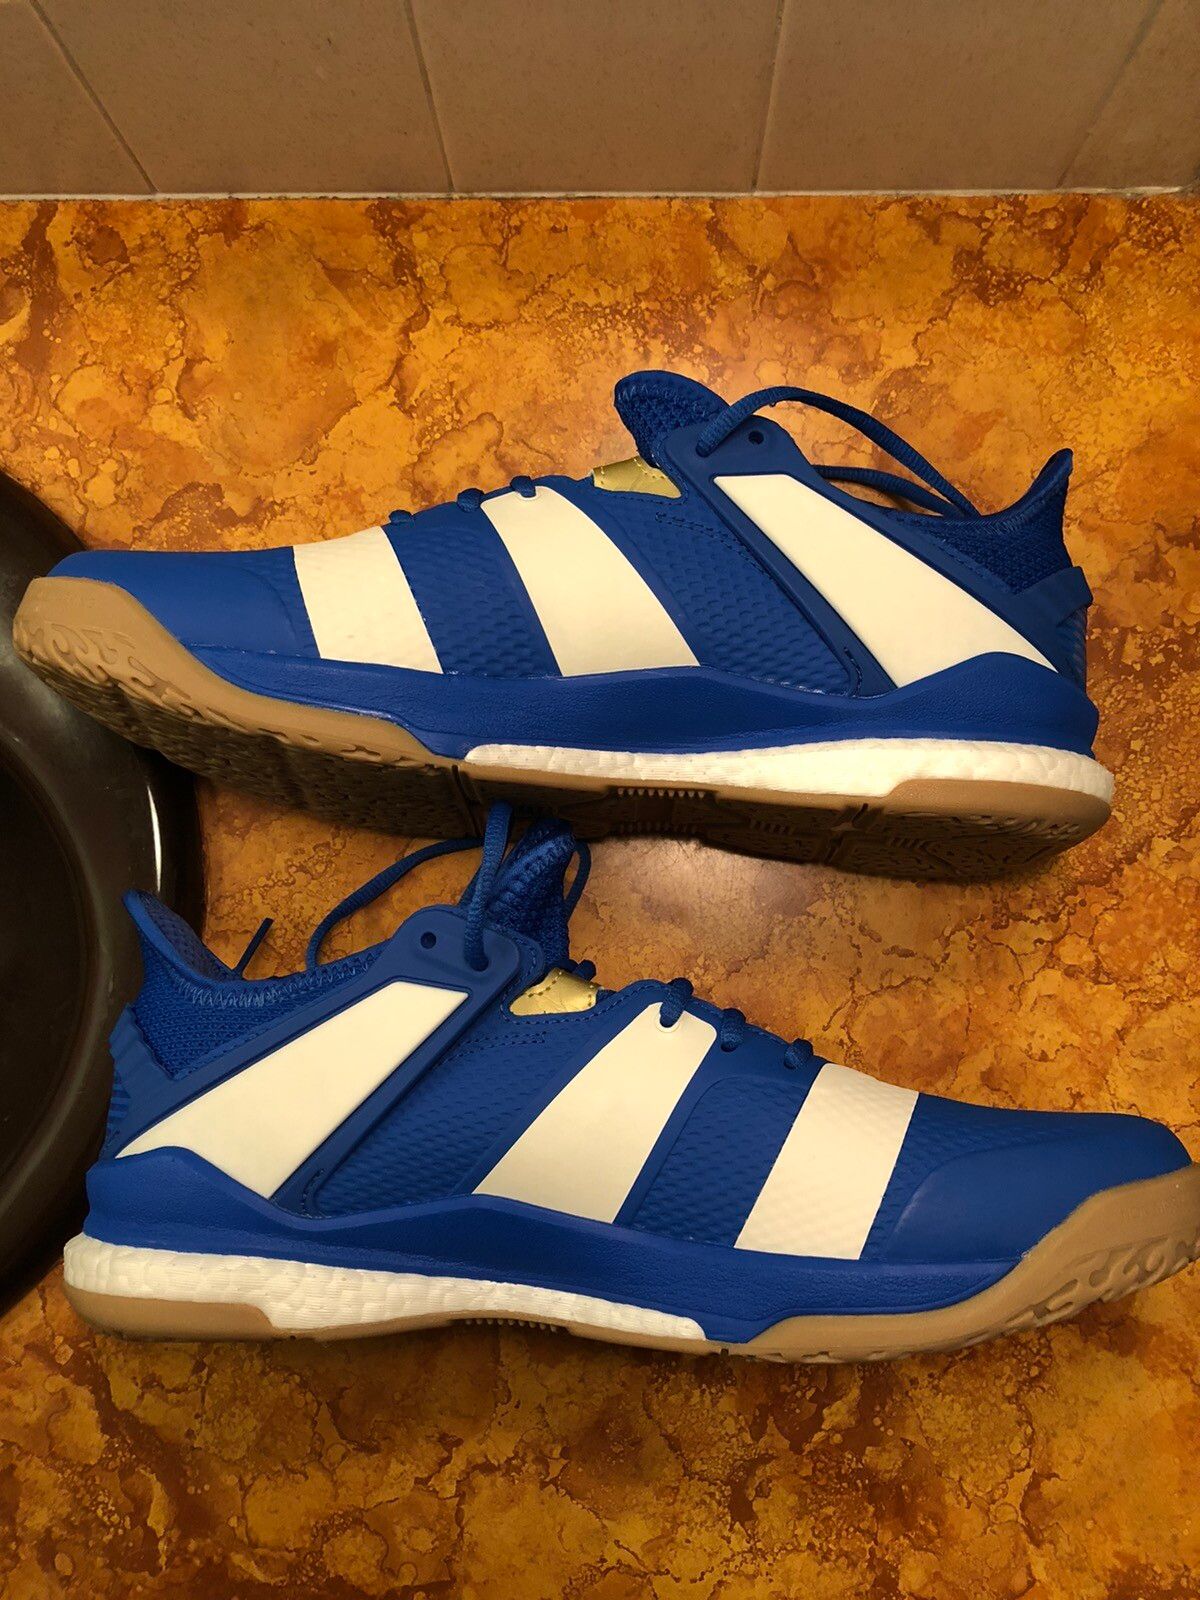 Adidas adidas Stabil X Men's Volleyball Shoes Blue/Gold Size US 12.5 / EU 45-46 - 6 Thumbnail